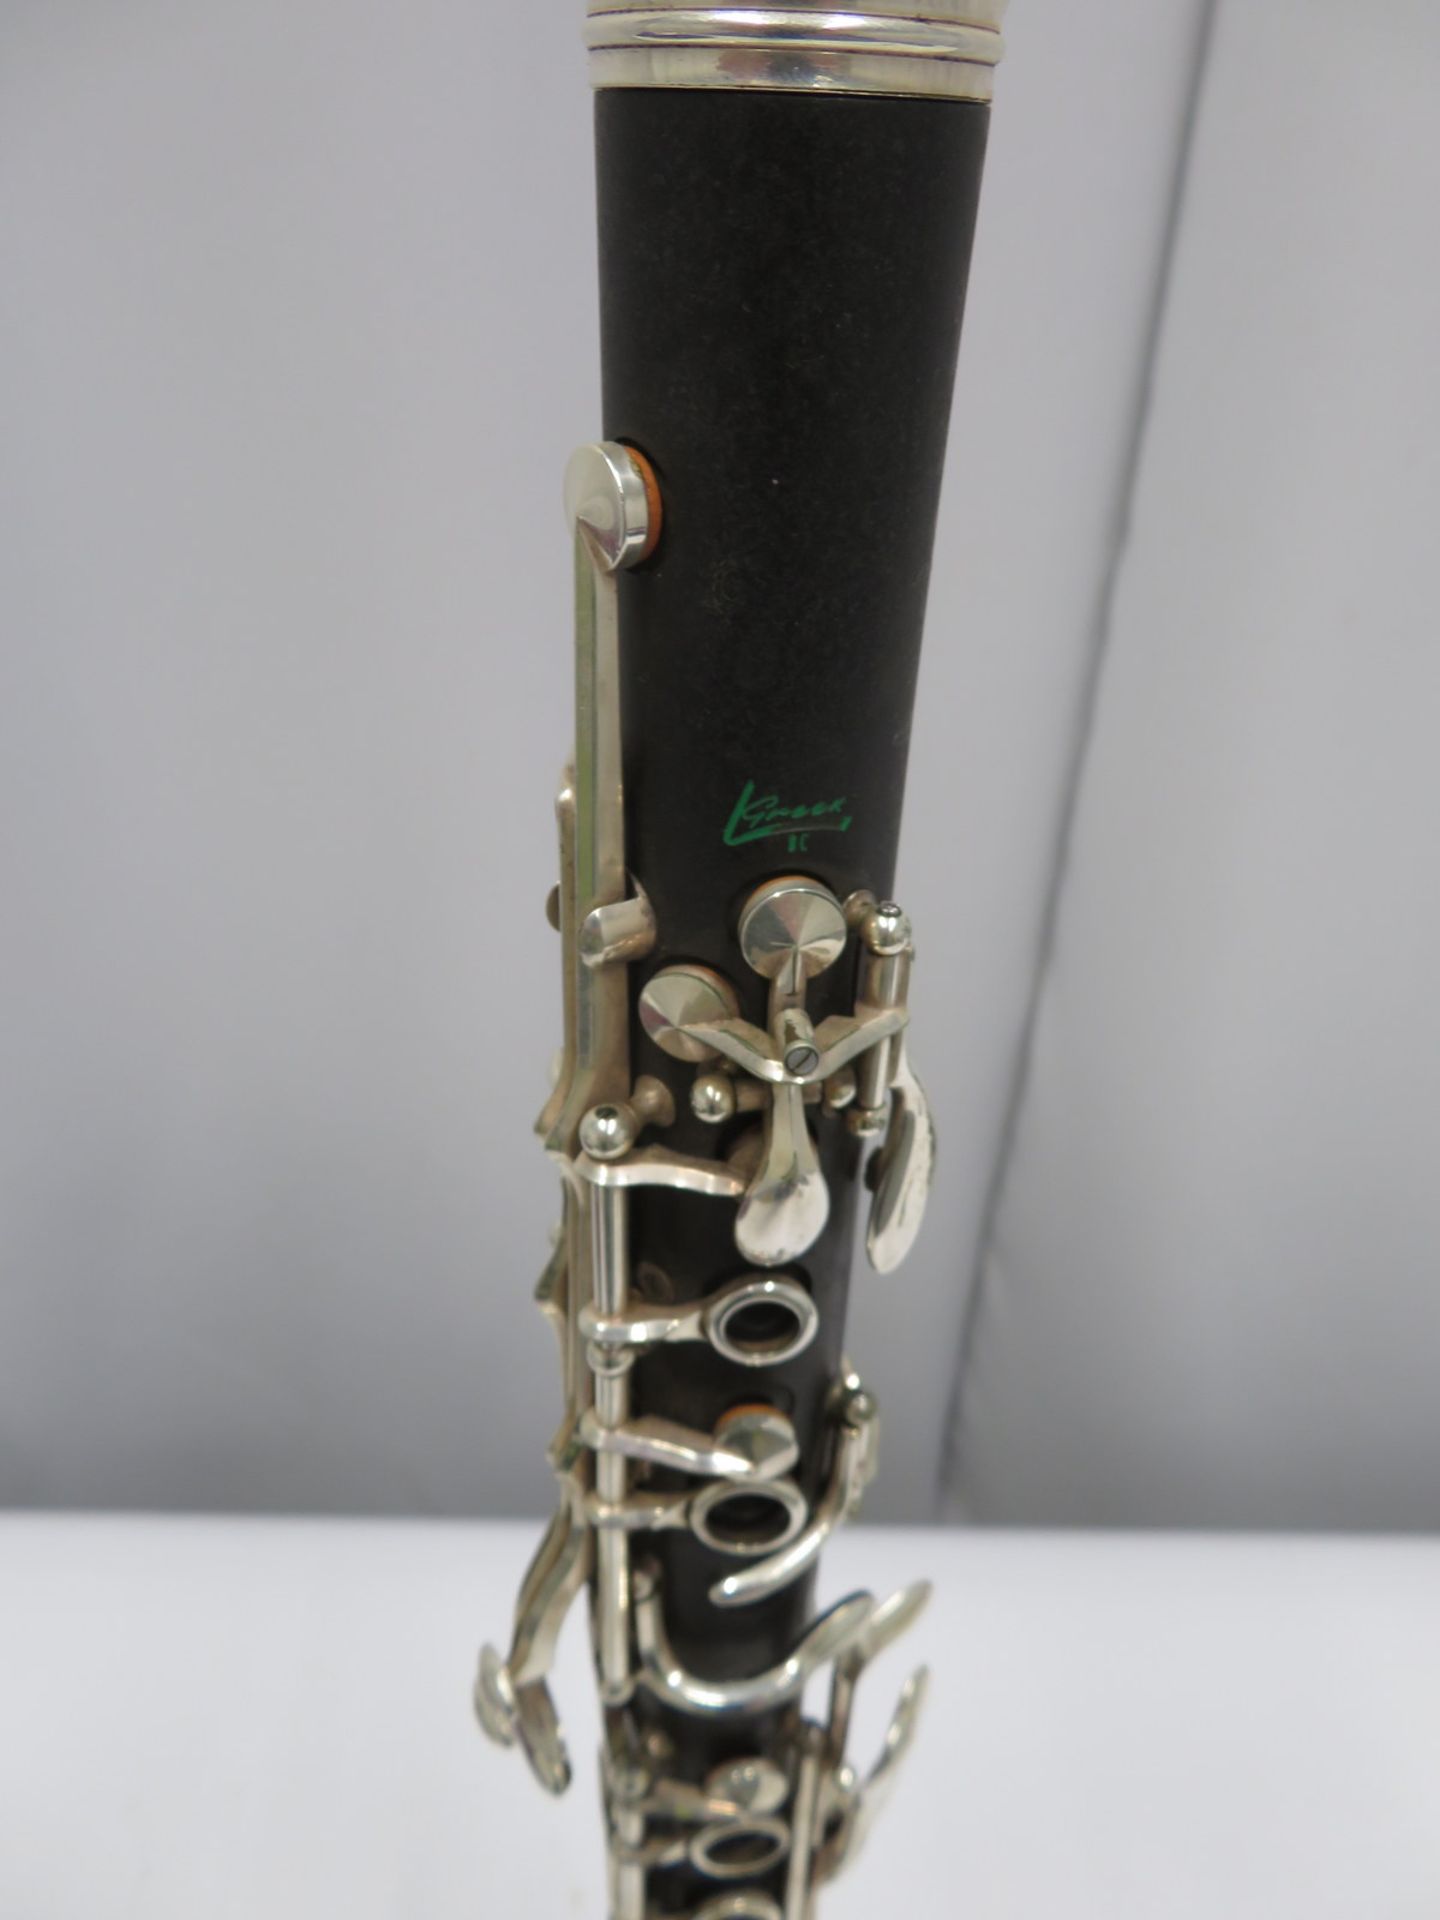 Buffet Crampon L Green clarinet with case. Serial number: 479049. - Image 6 of 18